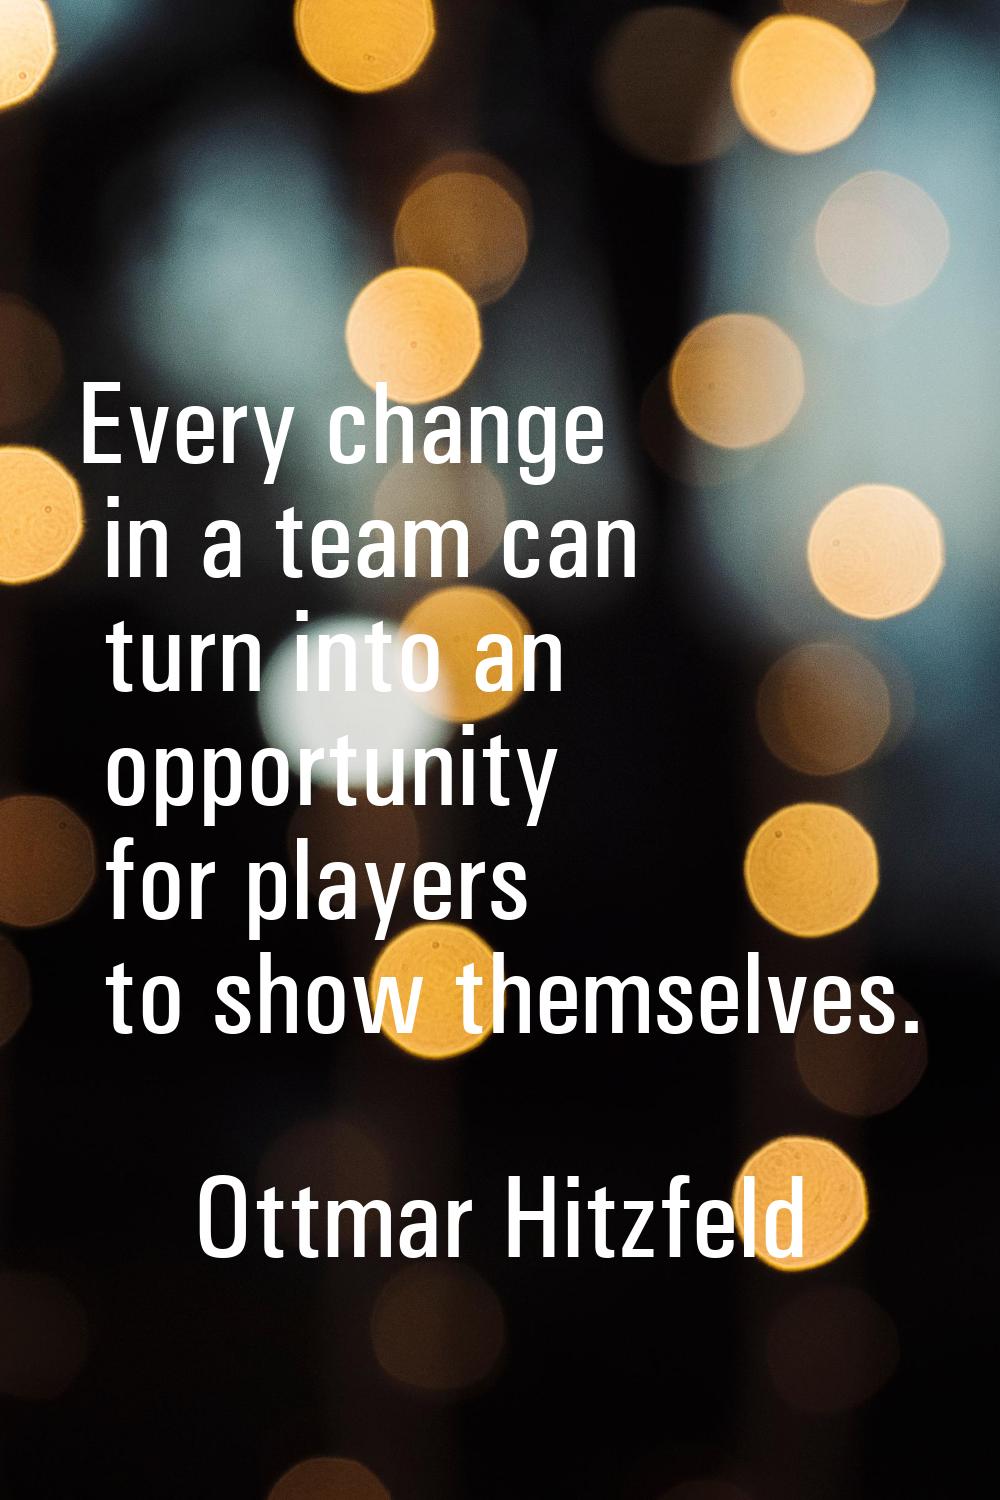 Every change in a team can turn into an opportunity for players to show themselves.